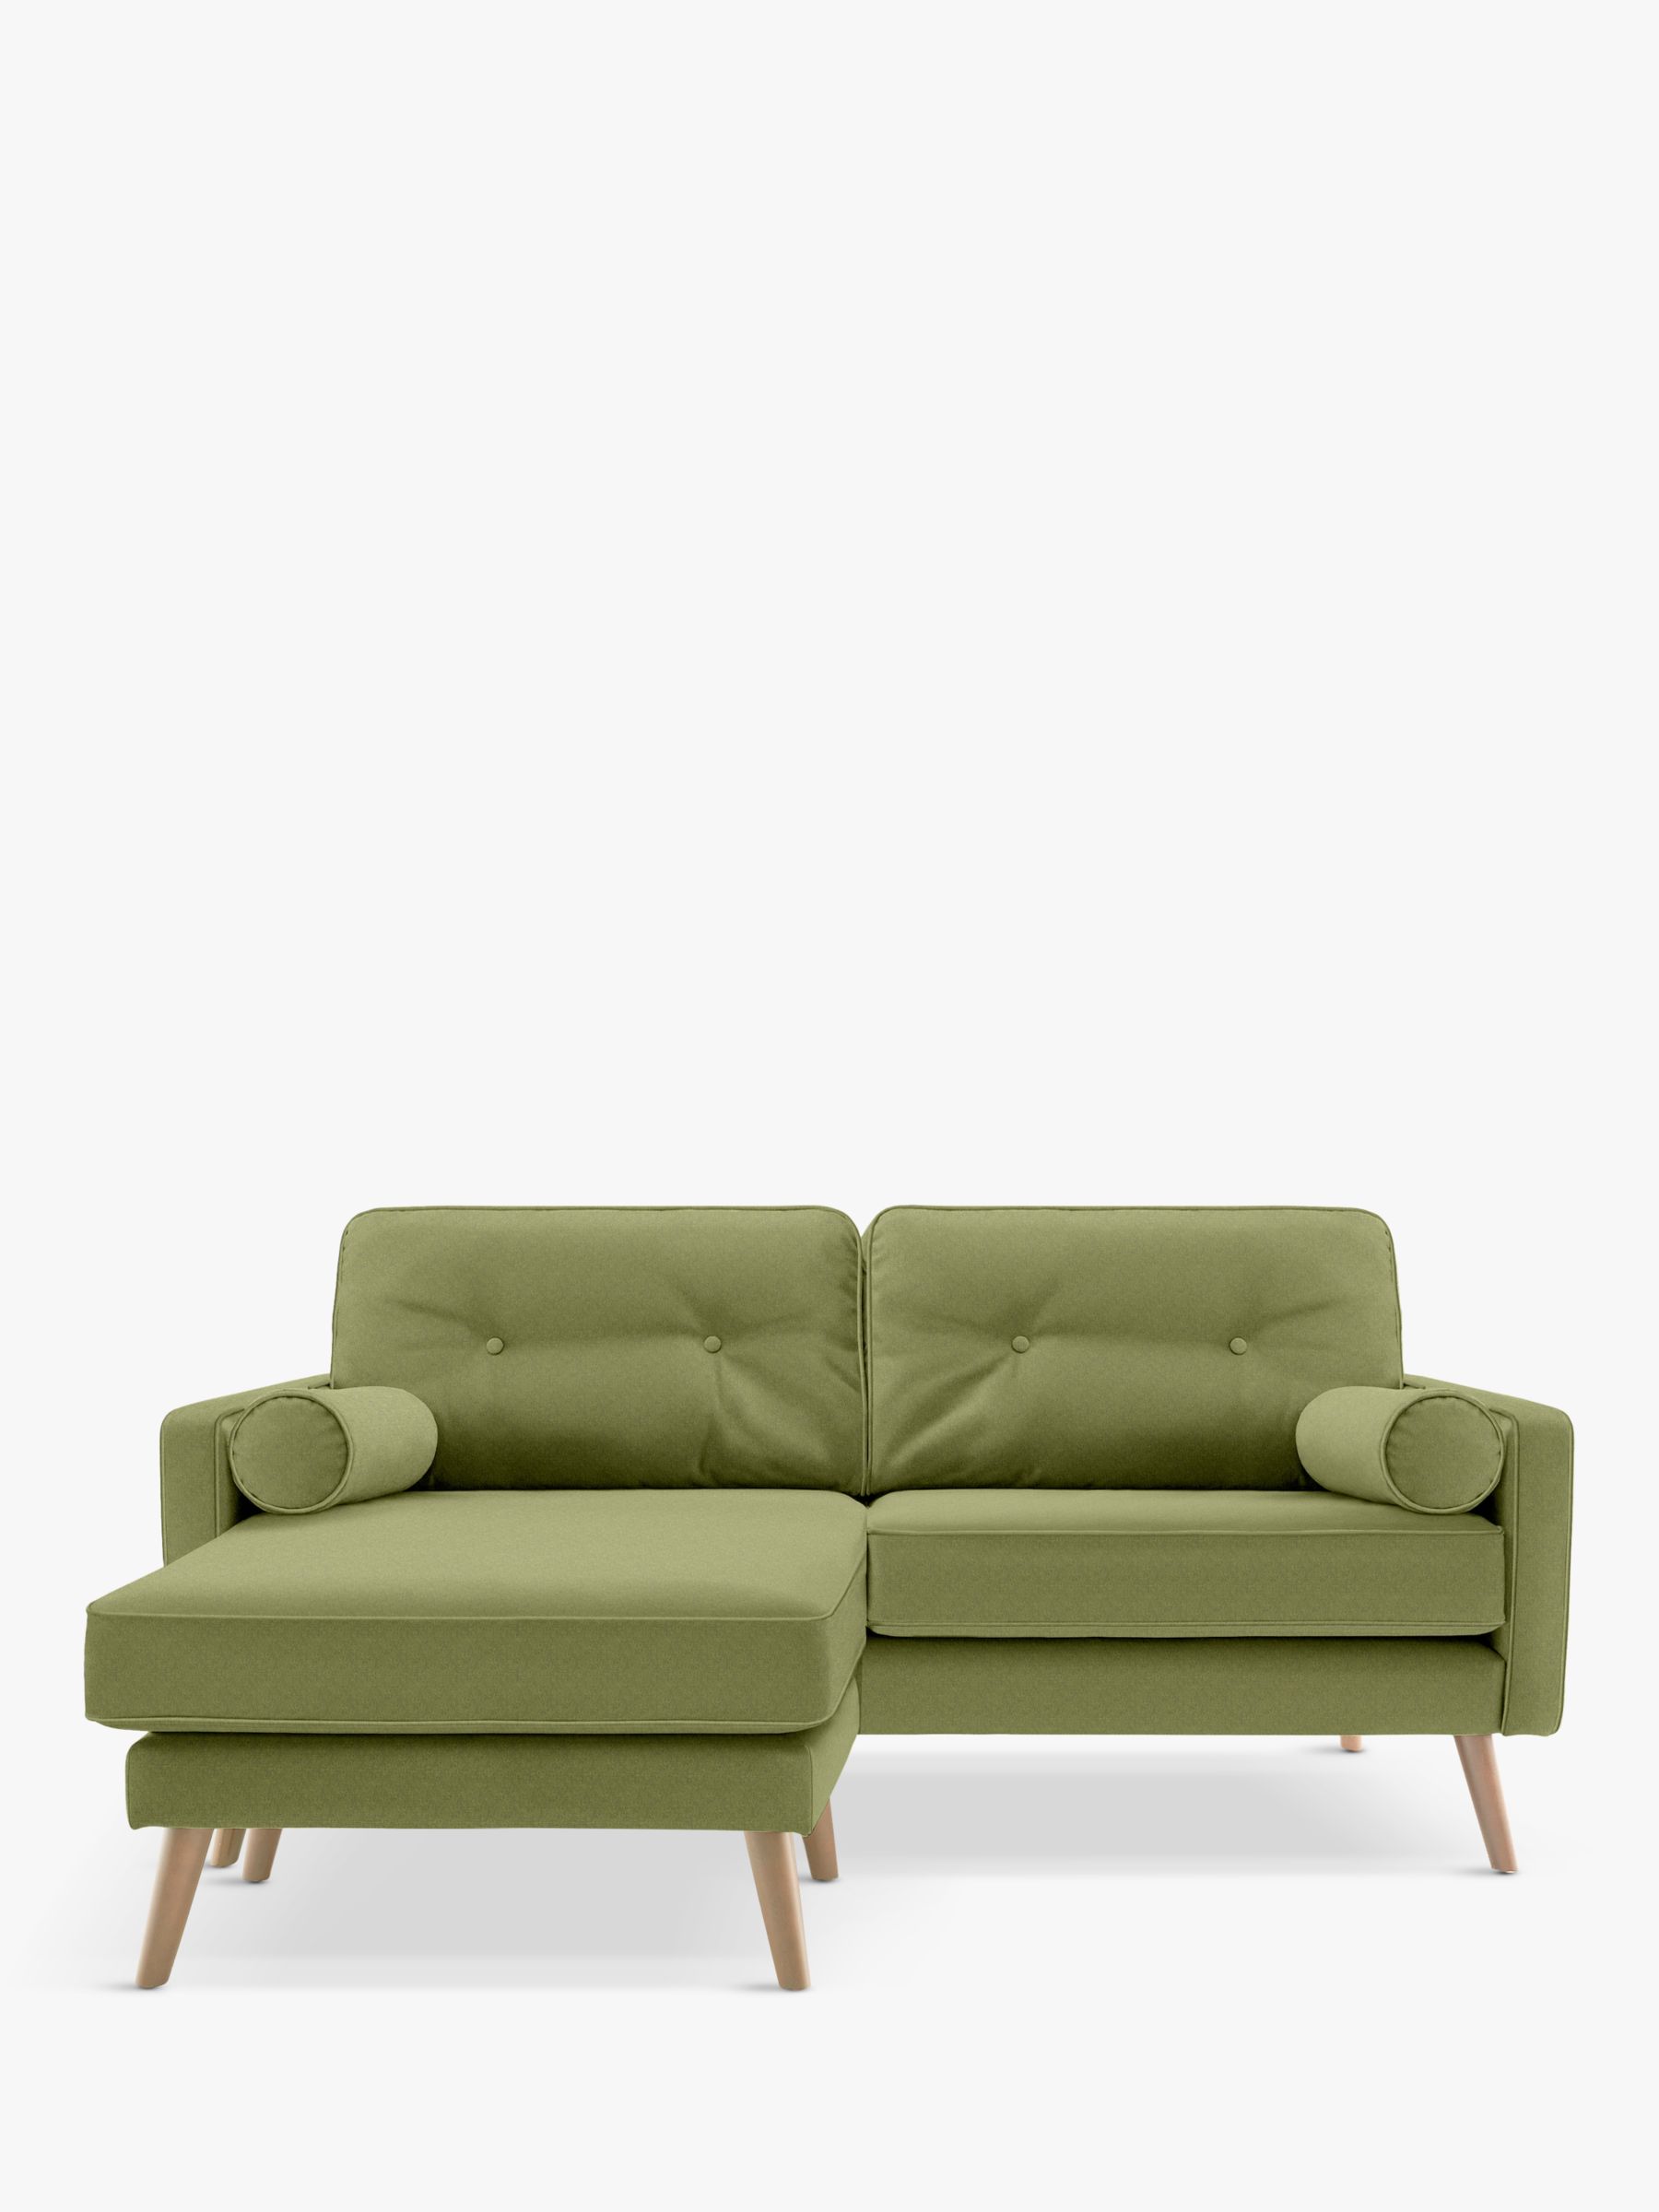 The Sixty Five Range, G Plan Vintage The Sixty Five LHF Medium 2 Seater Chaise End Sofa, Marl Green